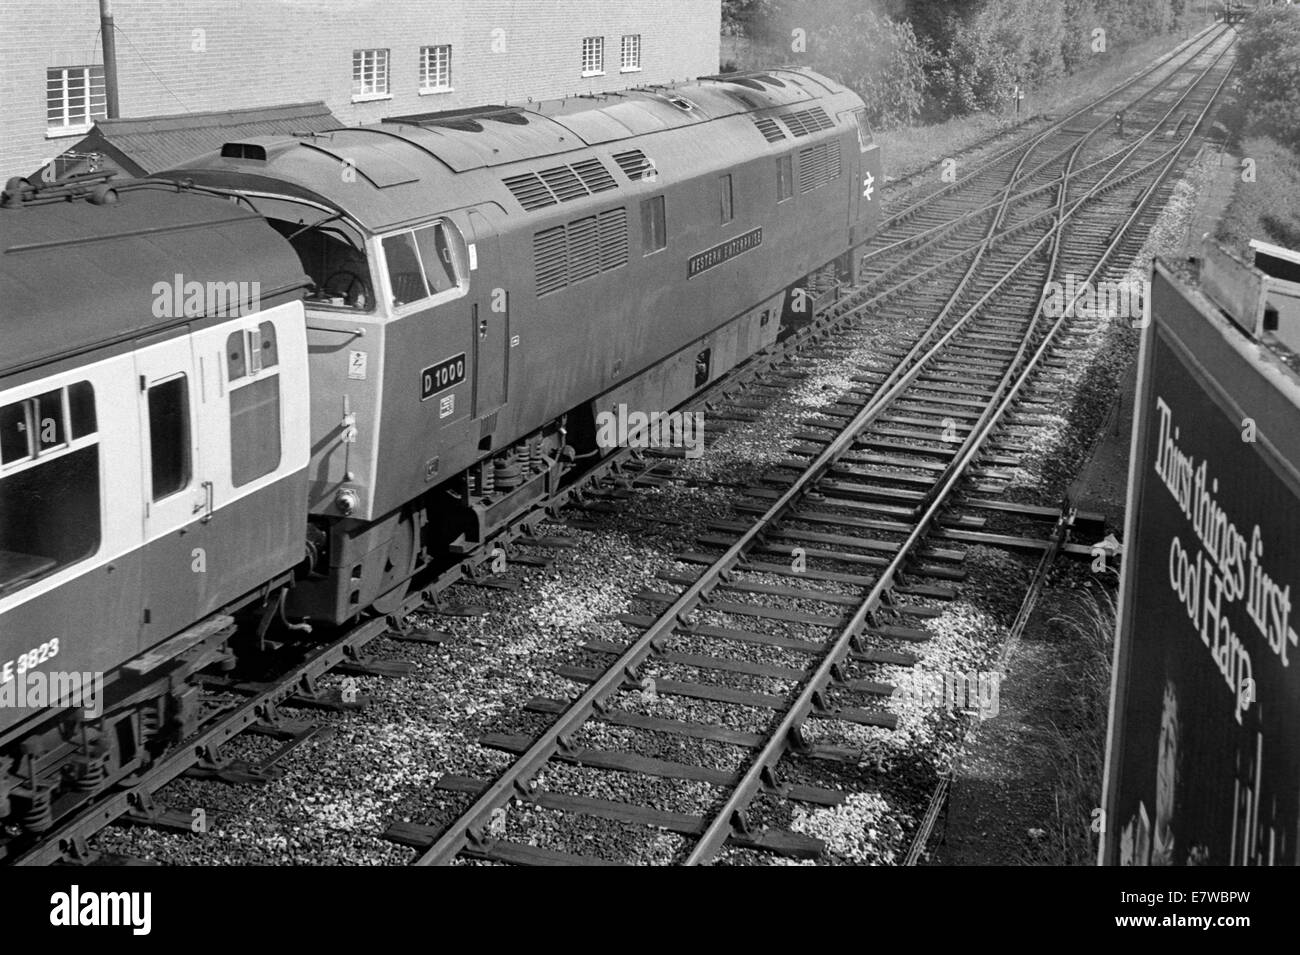 diesel locomotive class 52 number d1000 western enterprise at paignton england in 1972 Stock Photo